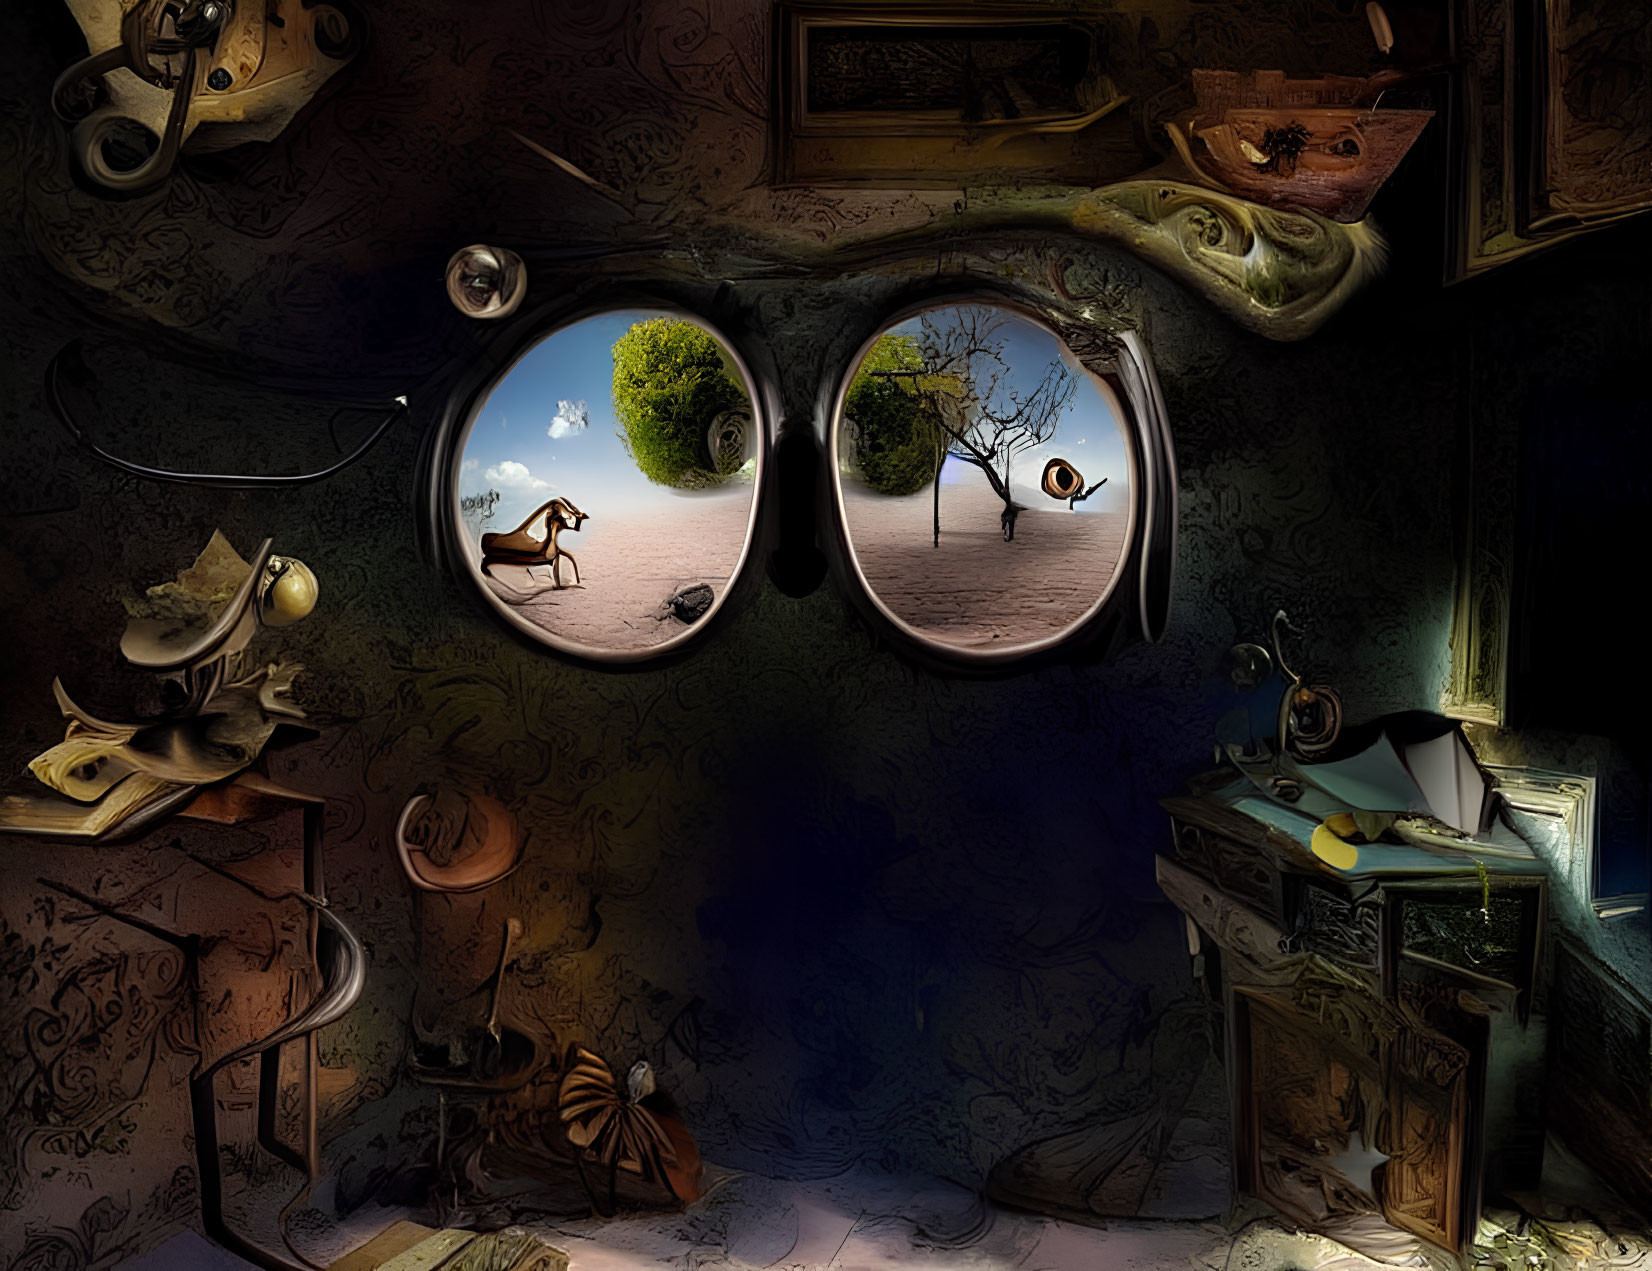 Surreal room with glasses-shaped windows and whimsical decor